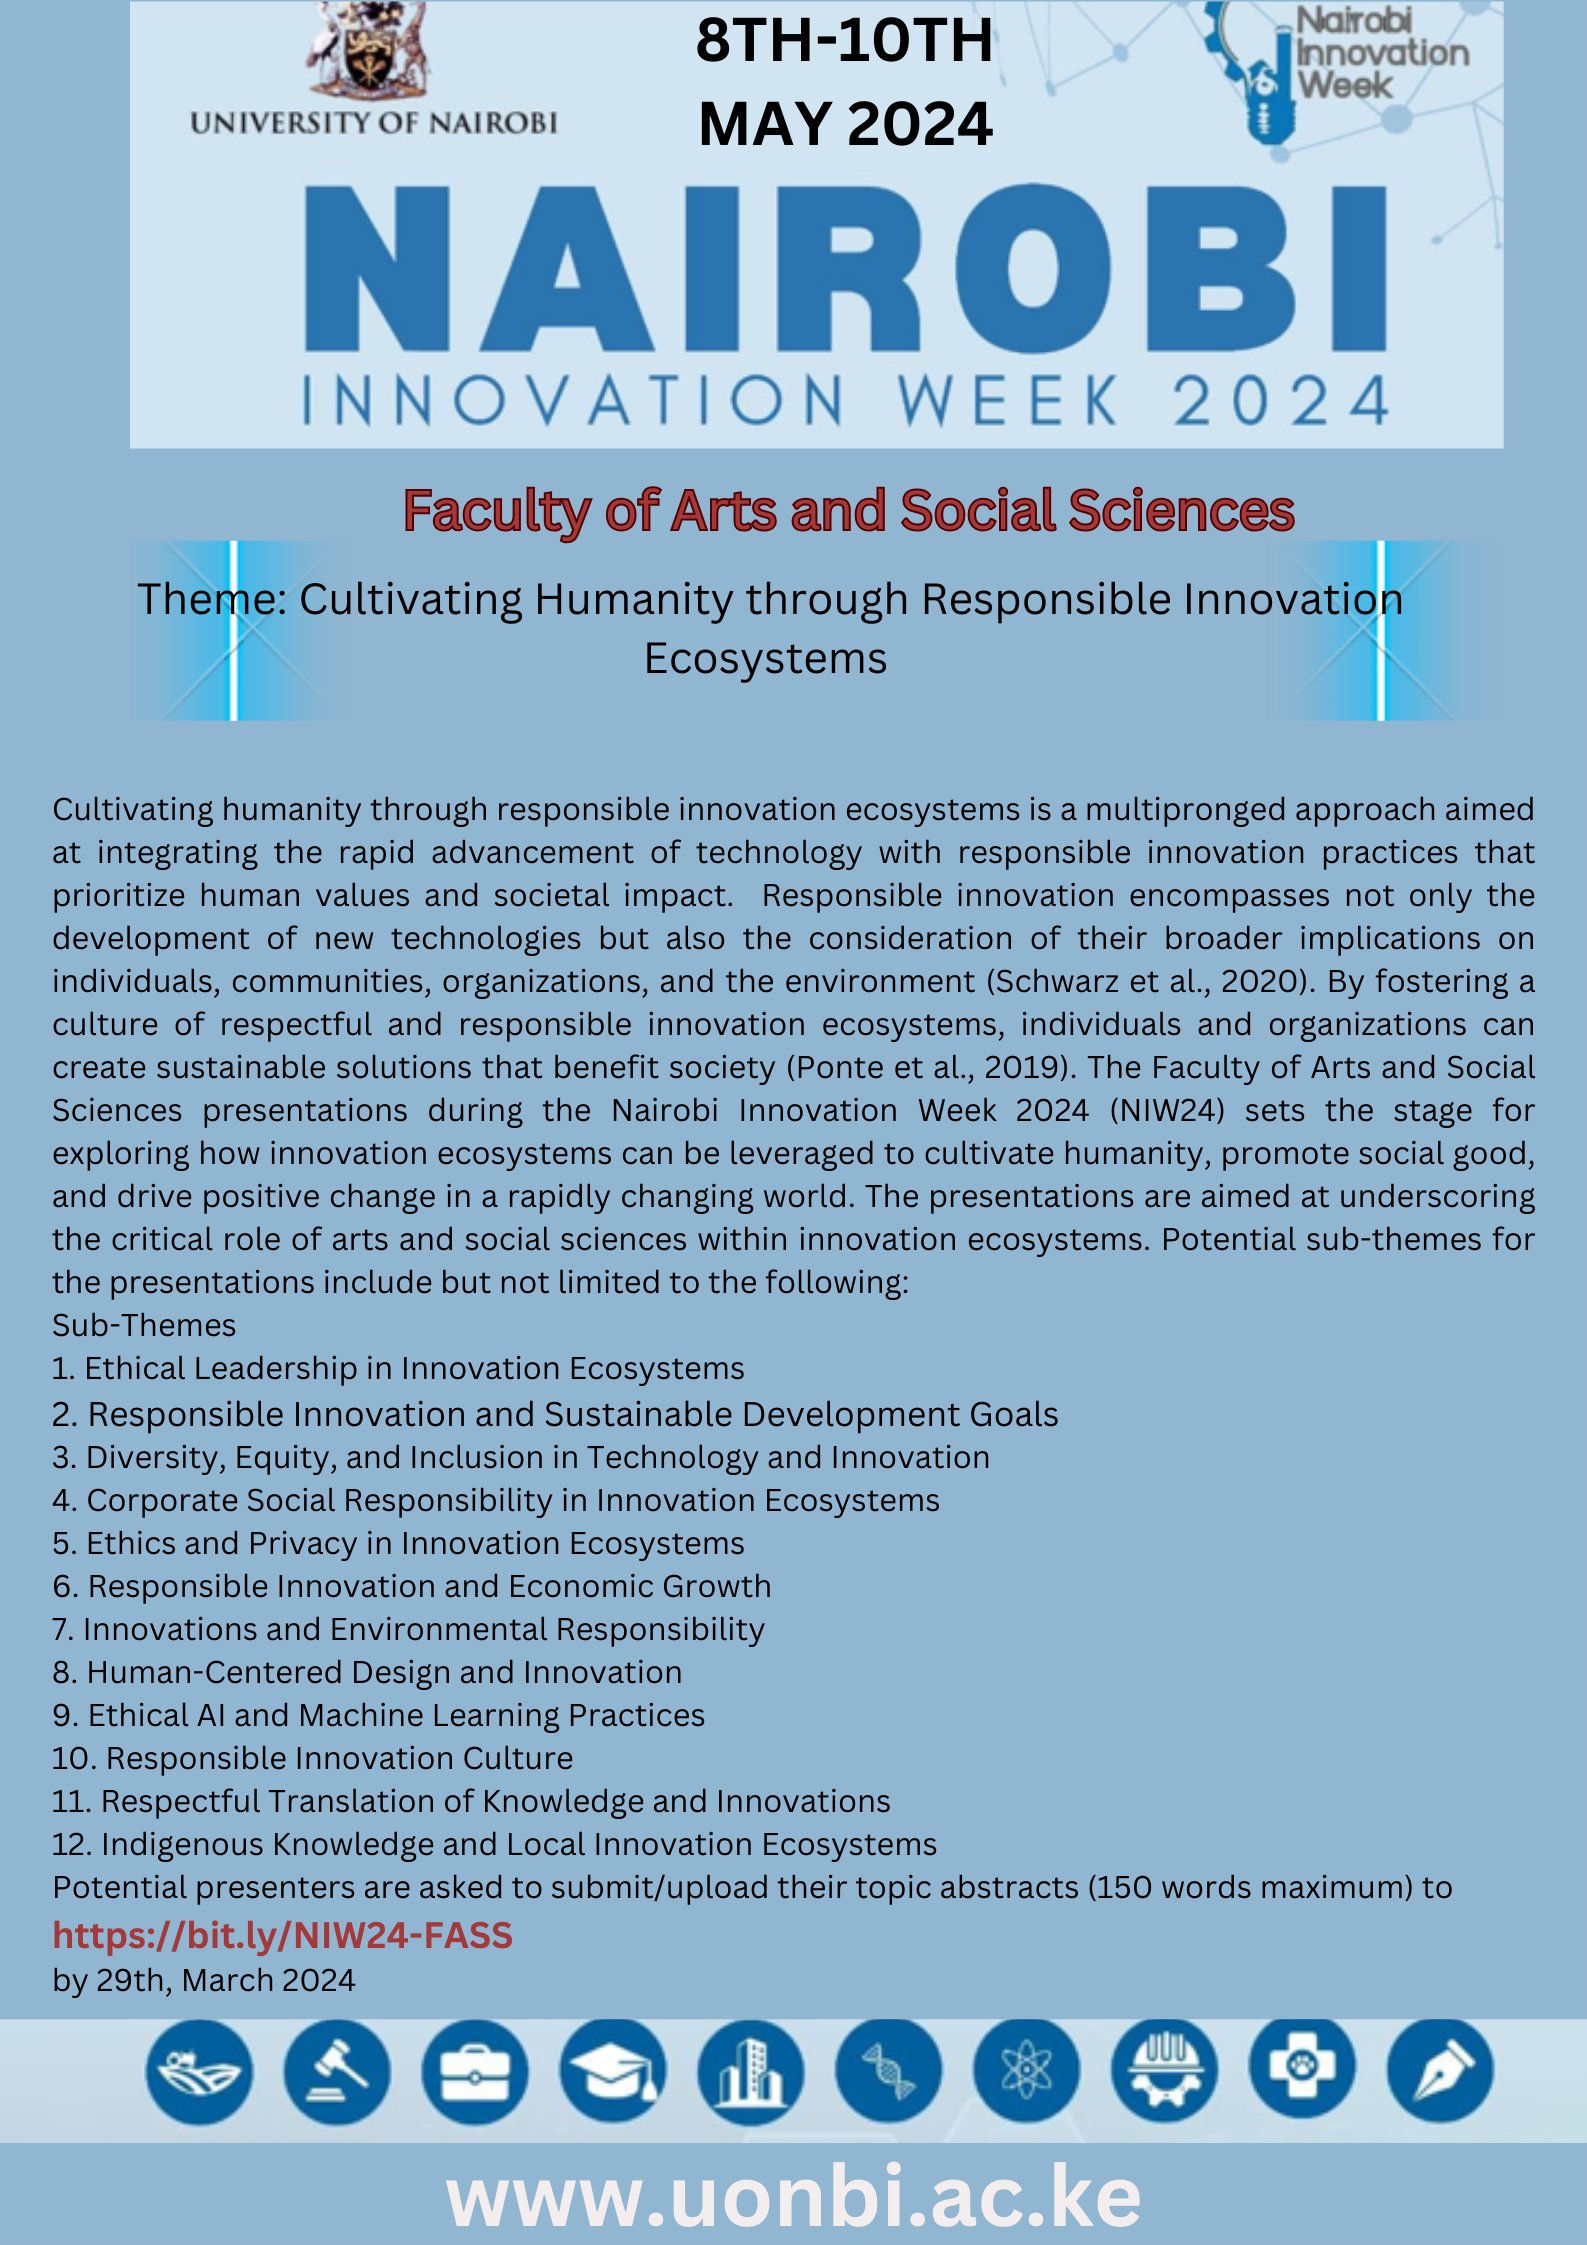 Cultivating Humanity through Responsible Innovation Ecosystems